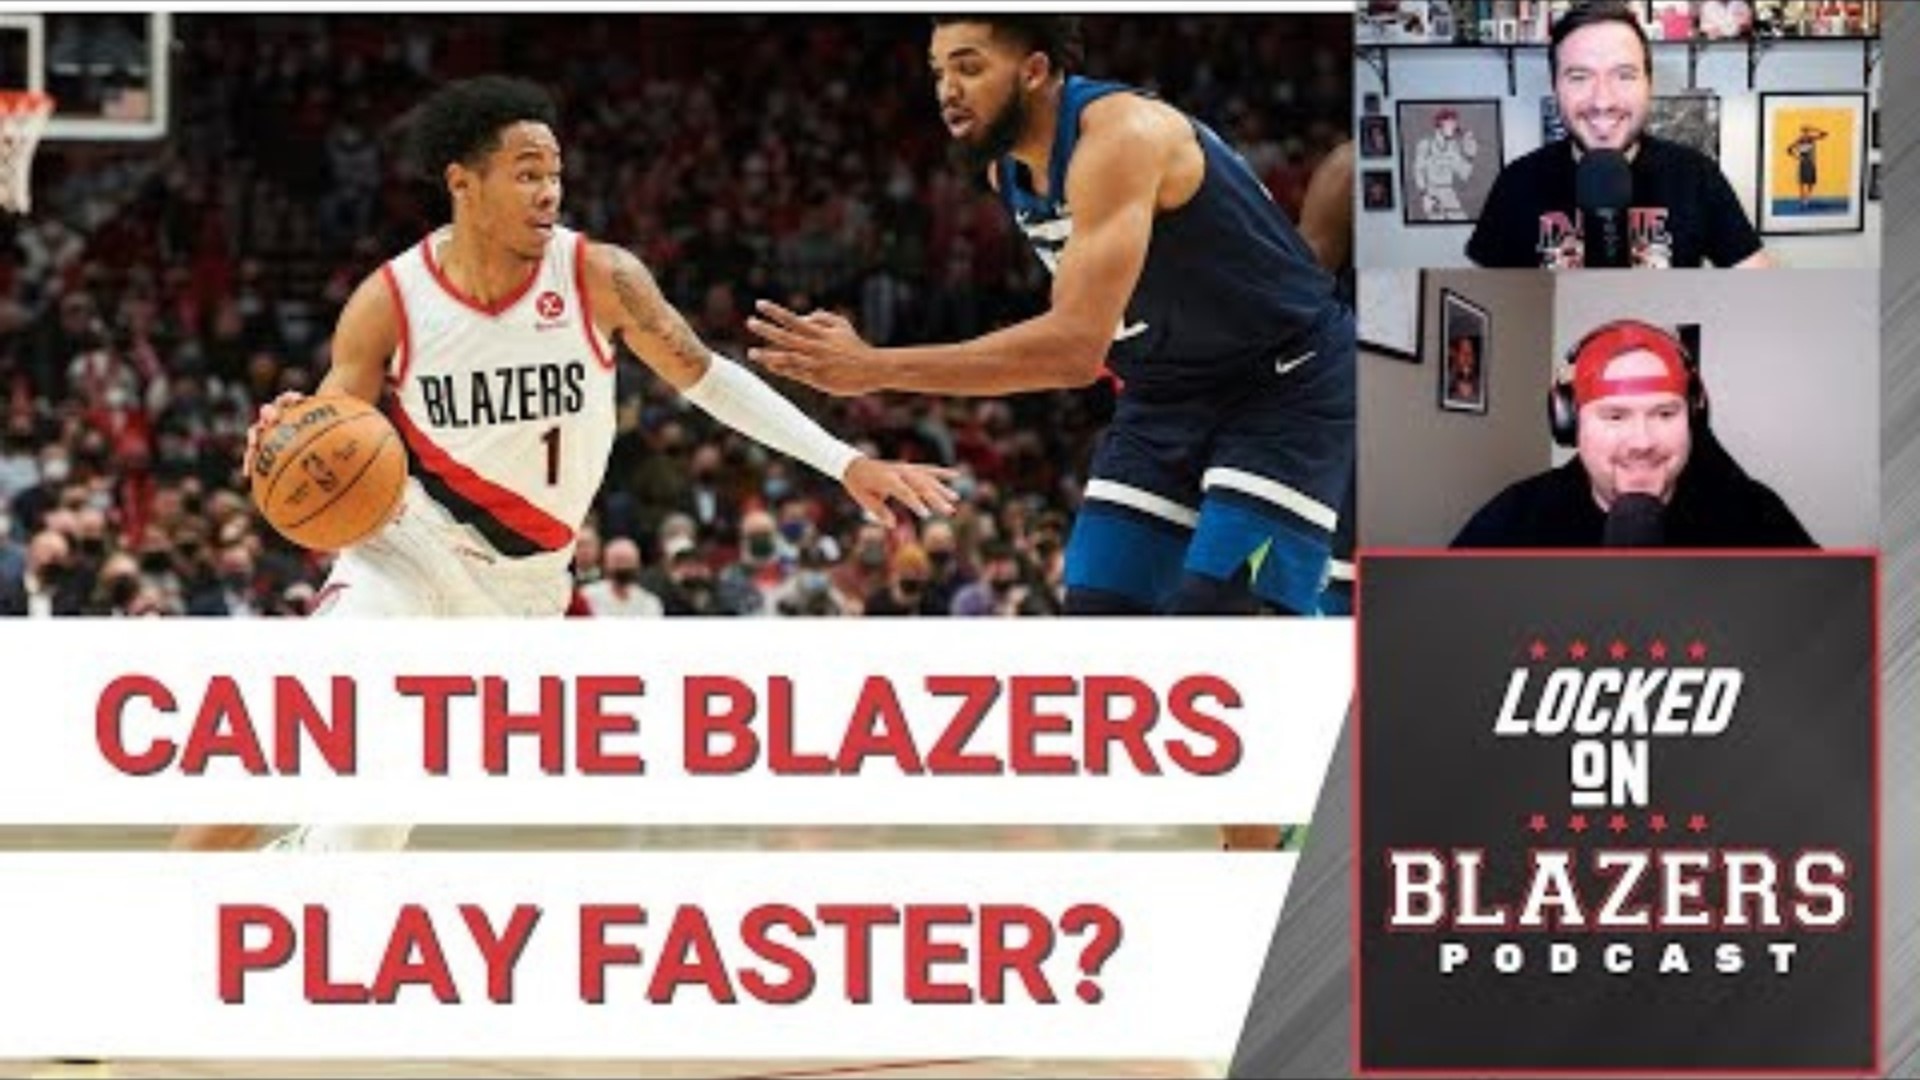 Danny Marang of Jacked Ramsays and 1080 The Fan joins the show to discuss the Blazers bench unit and the contrast of styles with the starting lineup.